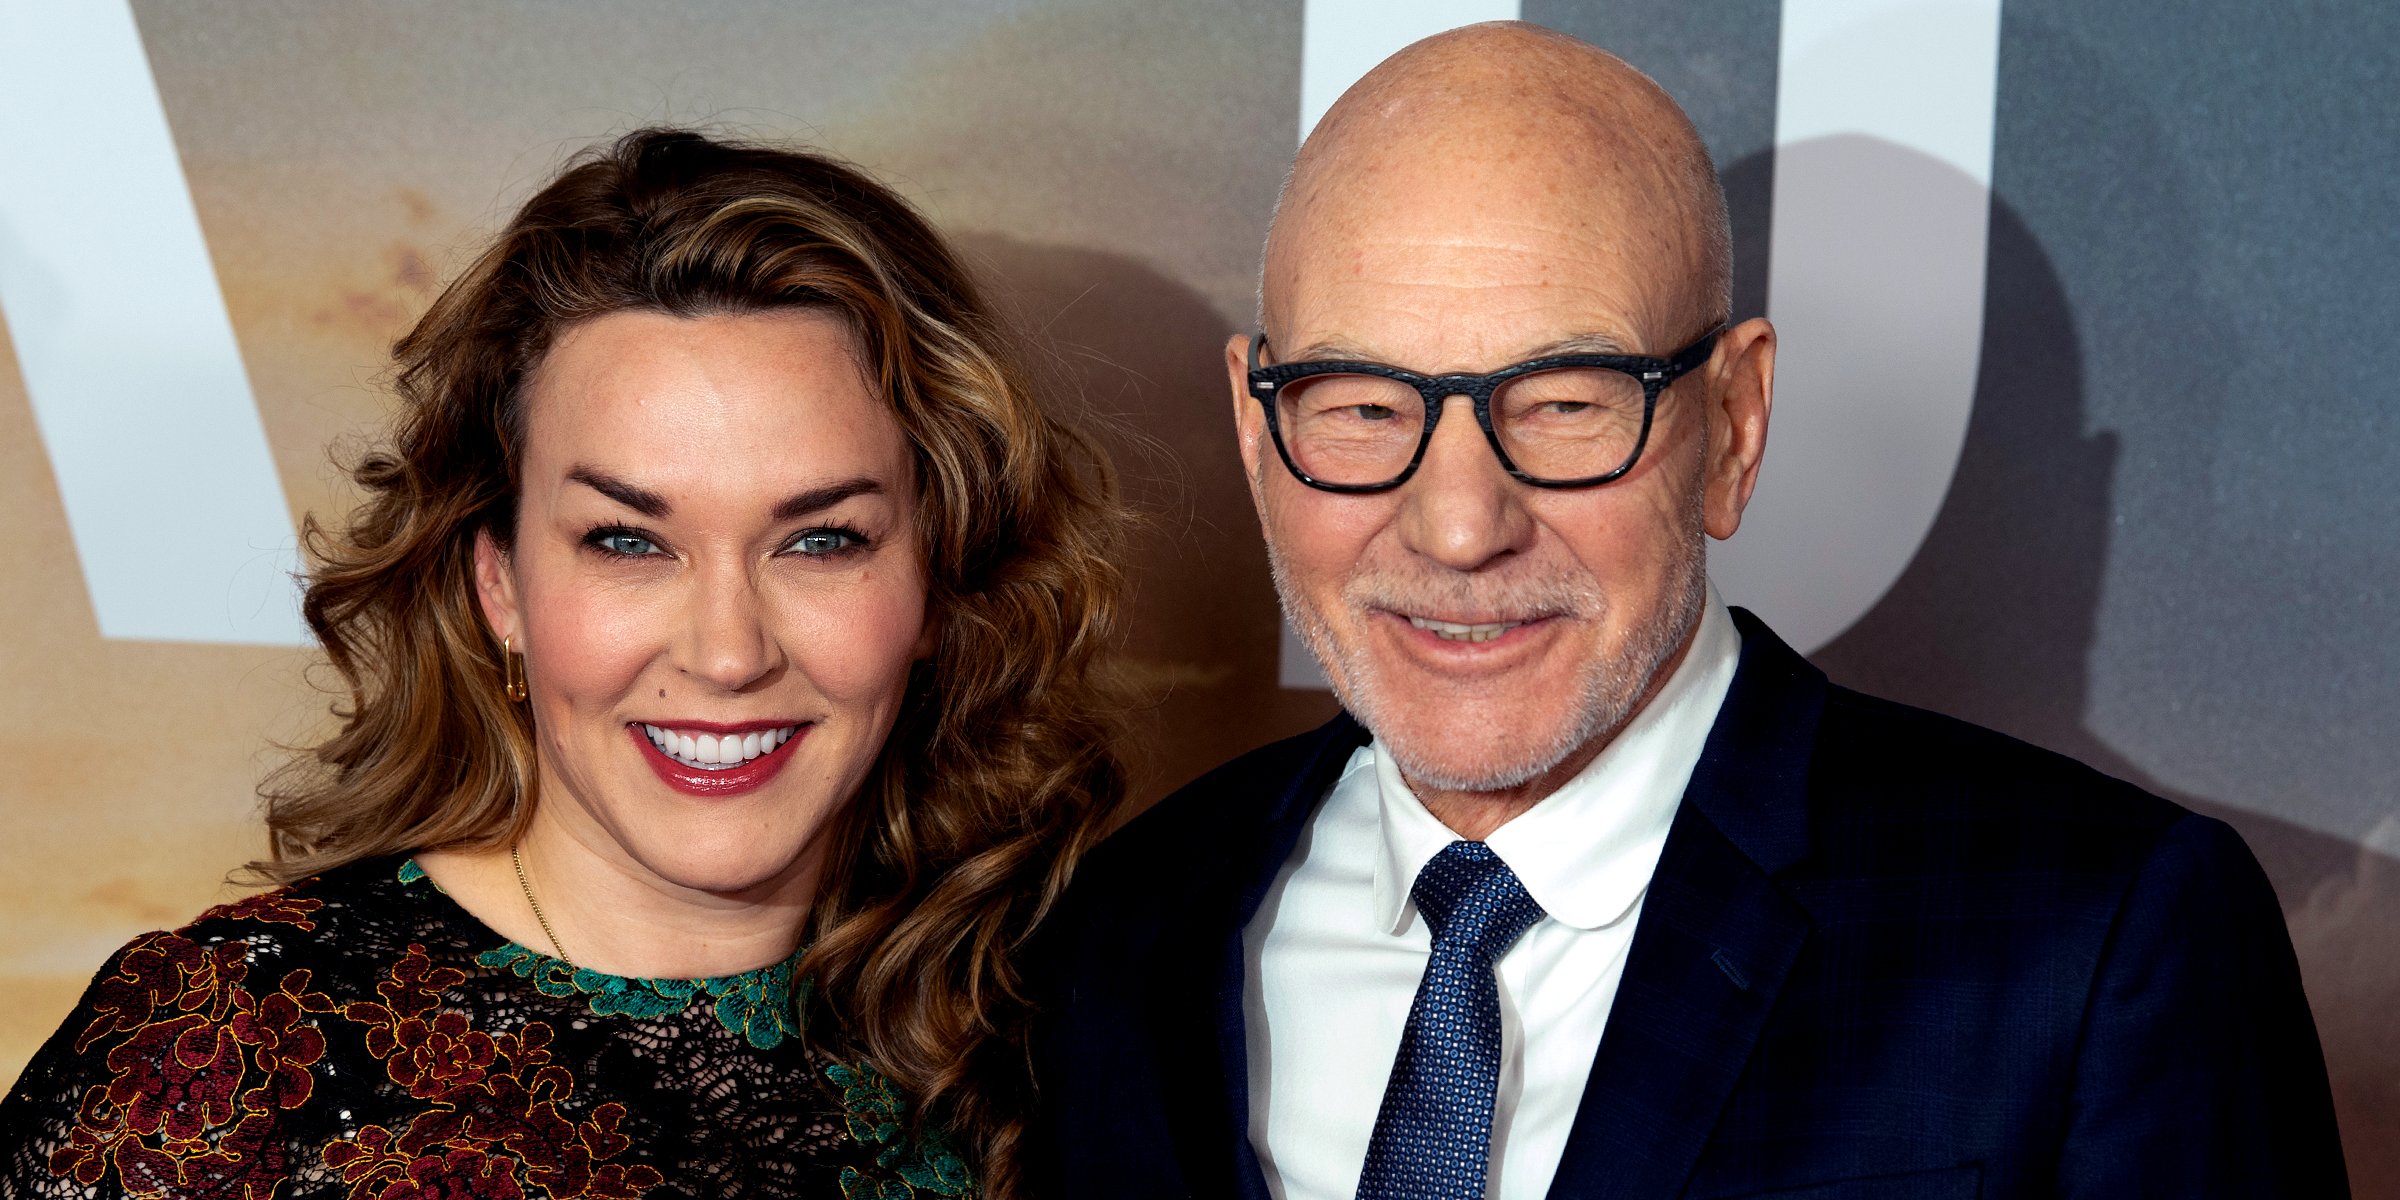 Patrick Stewart and Sunny Ozell. | Source: Getty Images